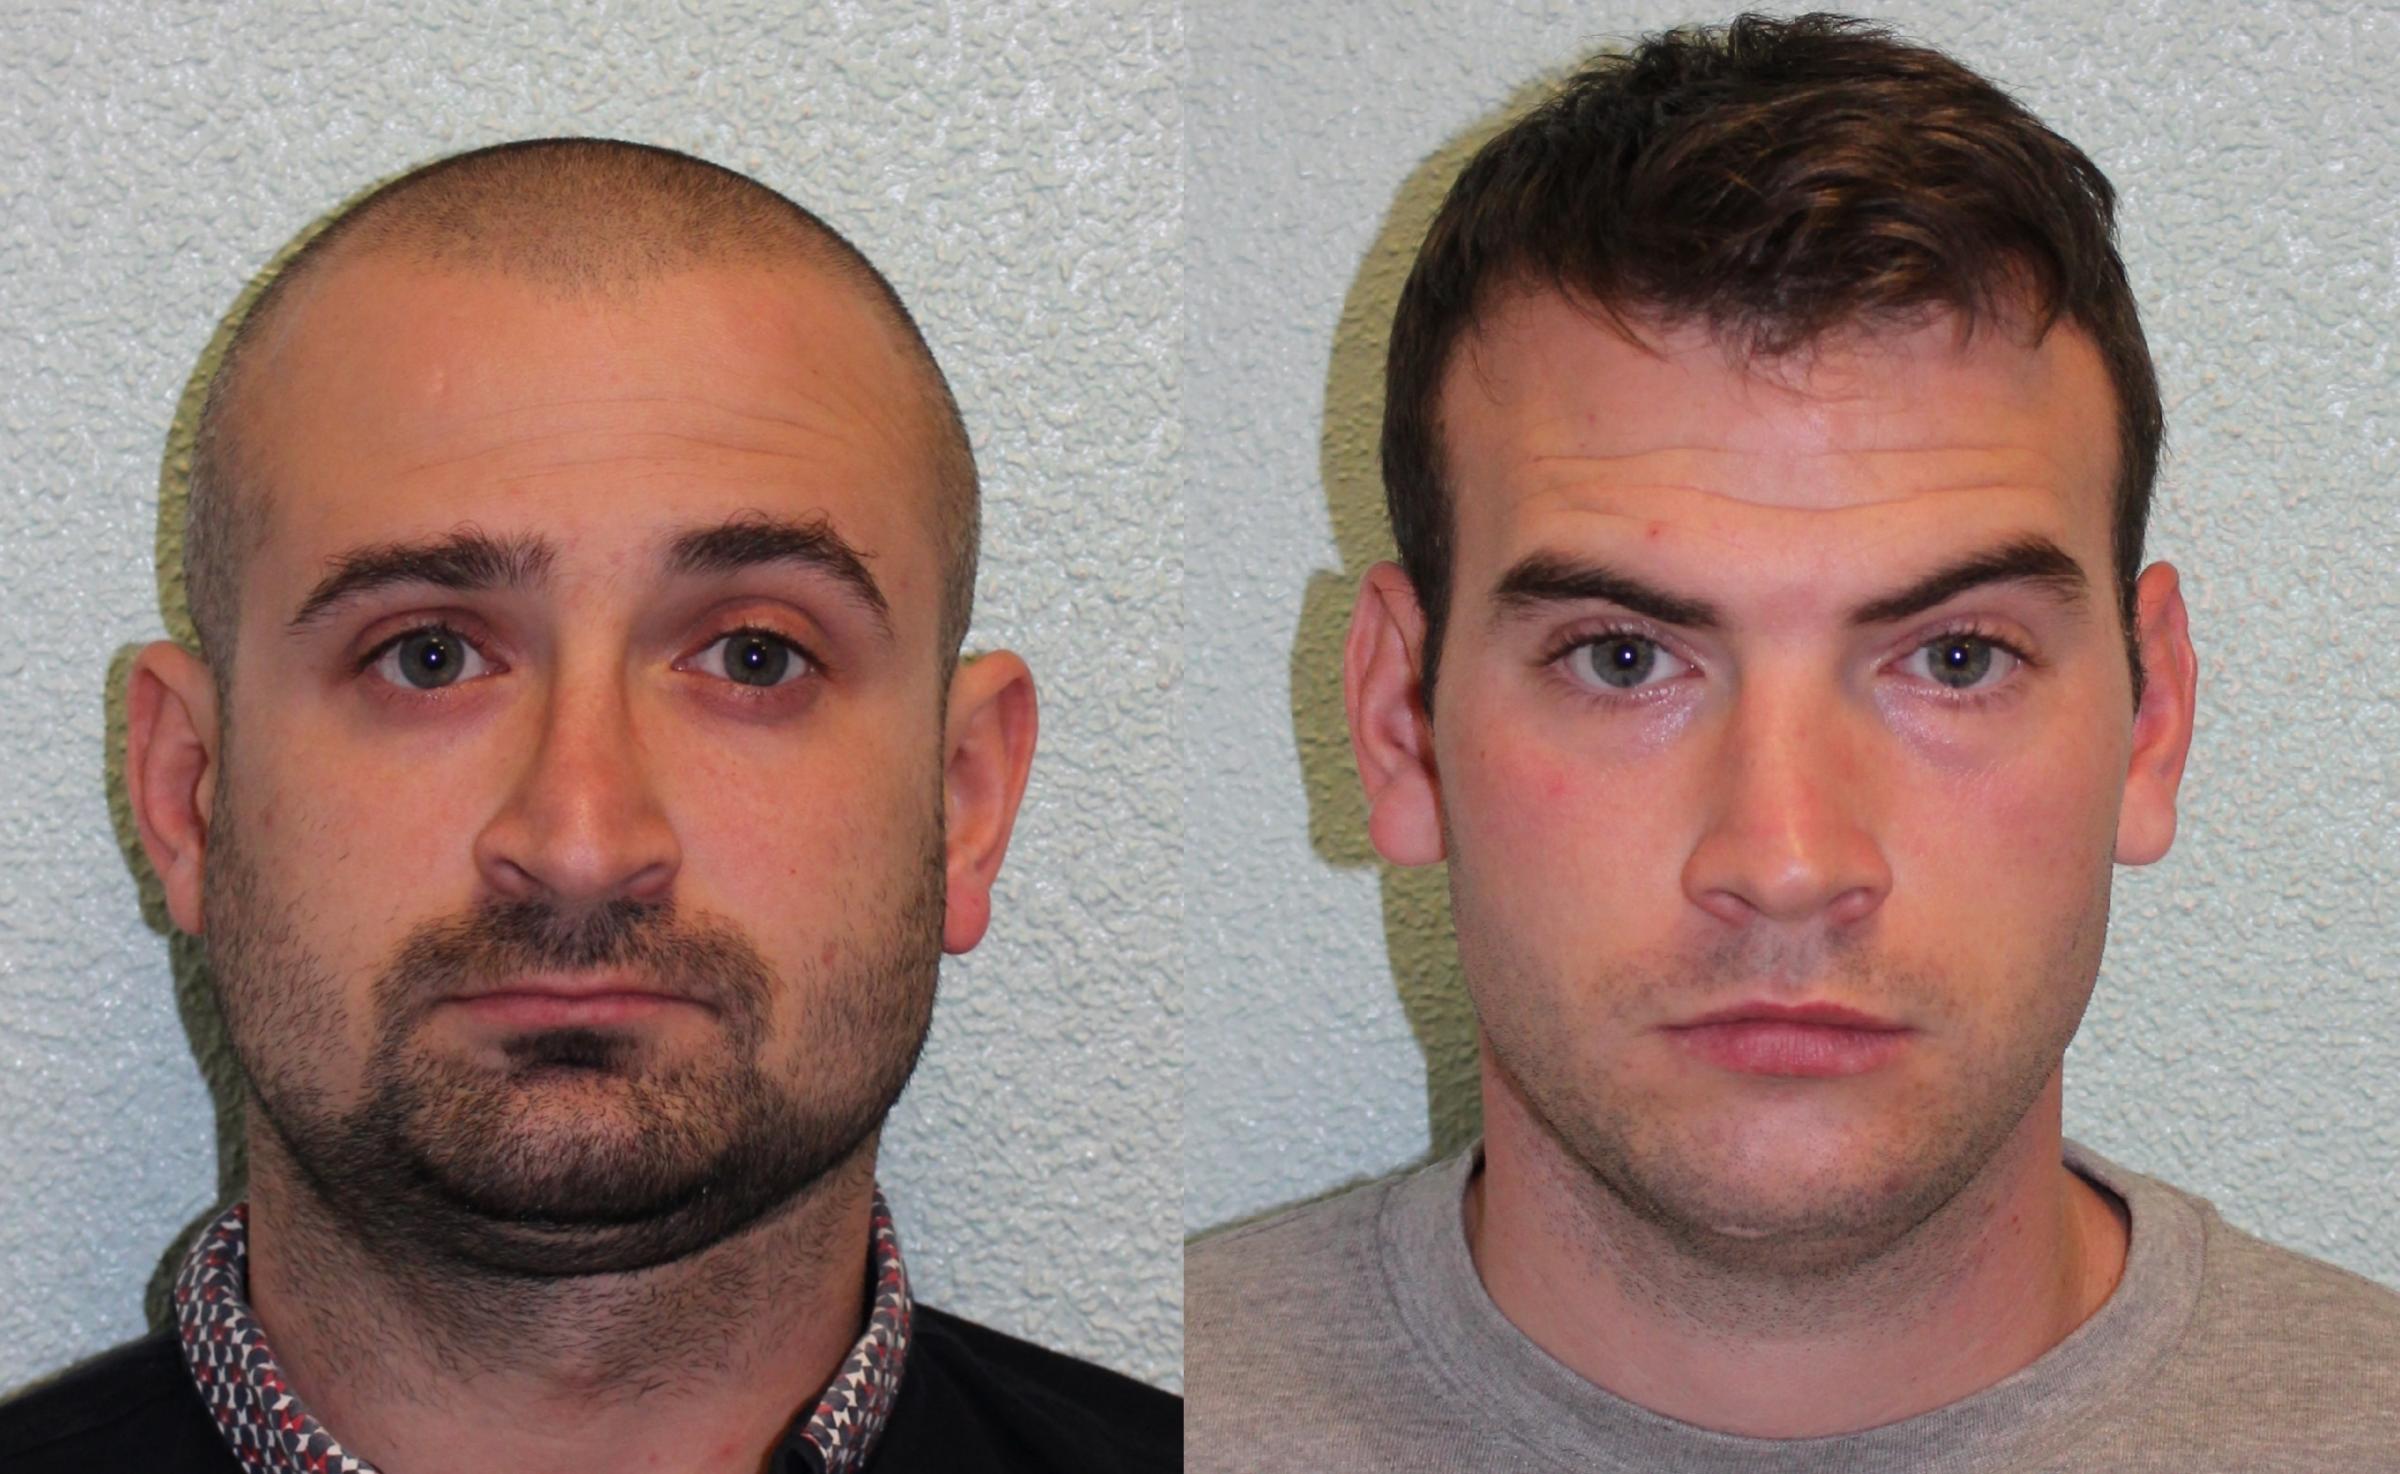 Crayford brothers who beat man to death in Eltham over 'gay' insult jailed for manslaughter